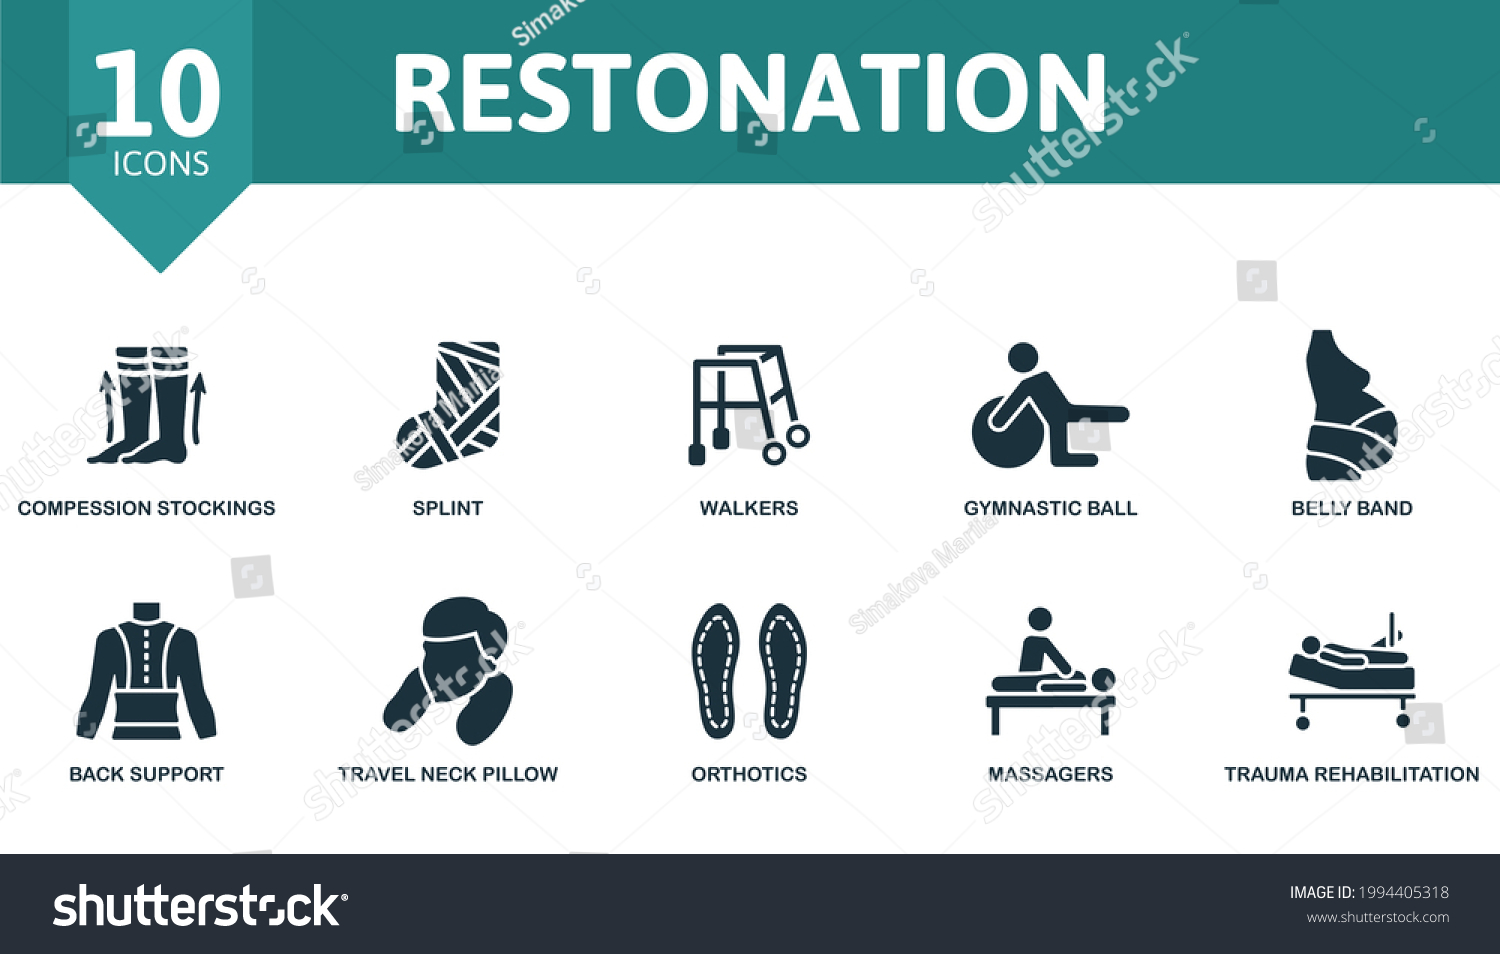 SVG of Restonation icon set. Contains editable icons trauma rehabilitation theme such as compression stockings, walkers, belly band and more. svg